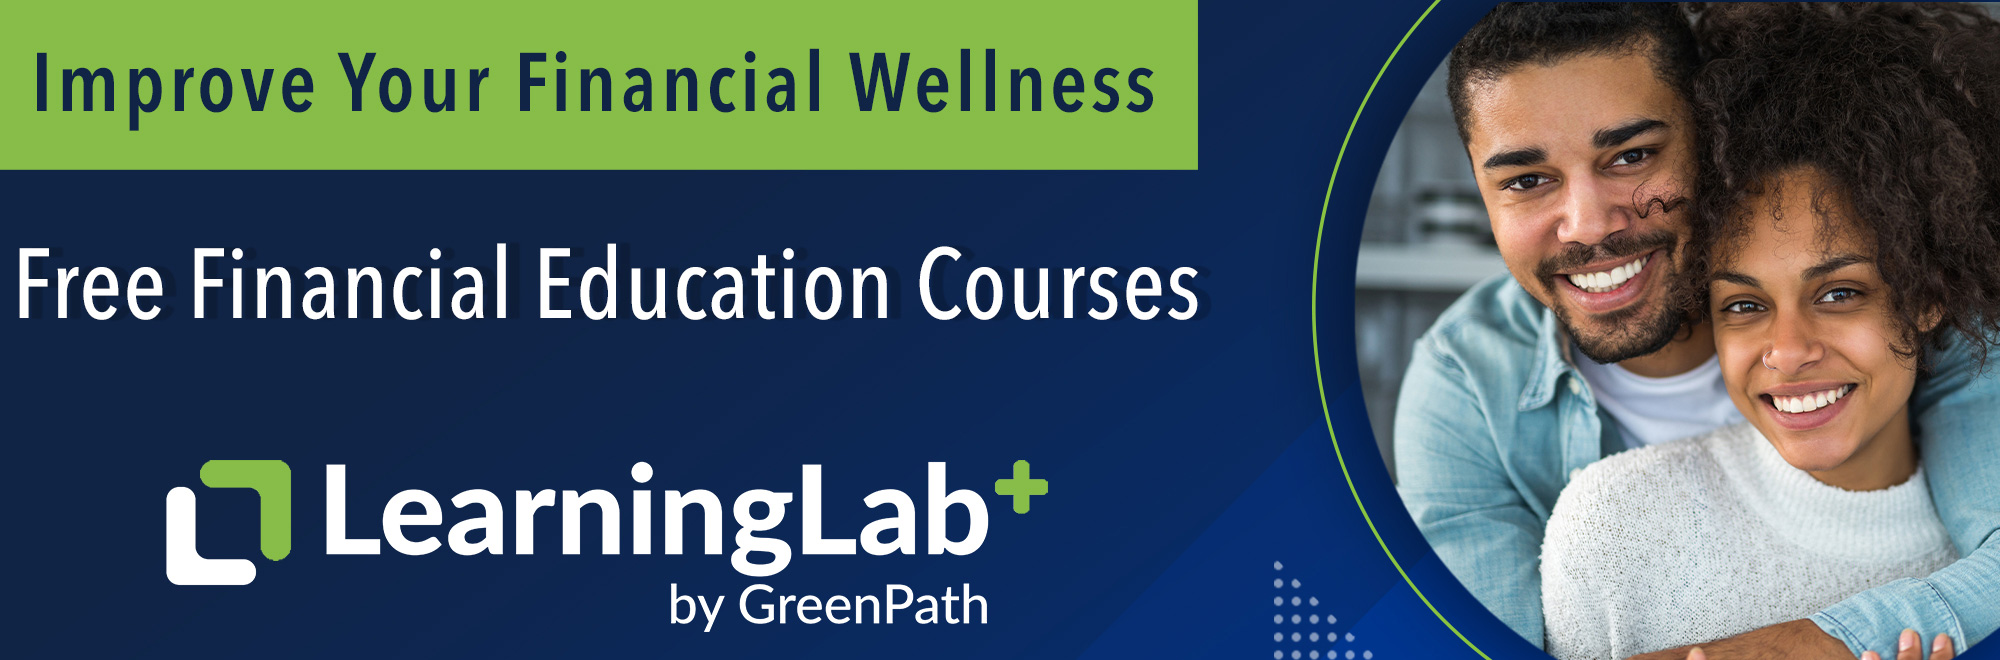 Improve Your Financial Wellness with Free Financial Education Courses from Learning Lab by GreenPath